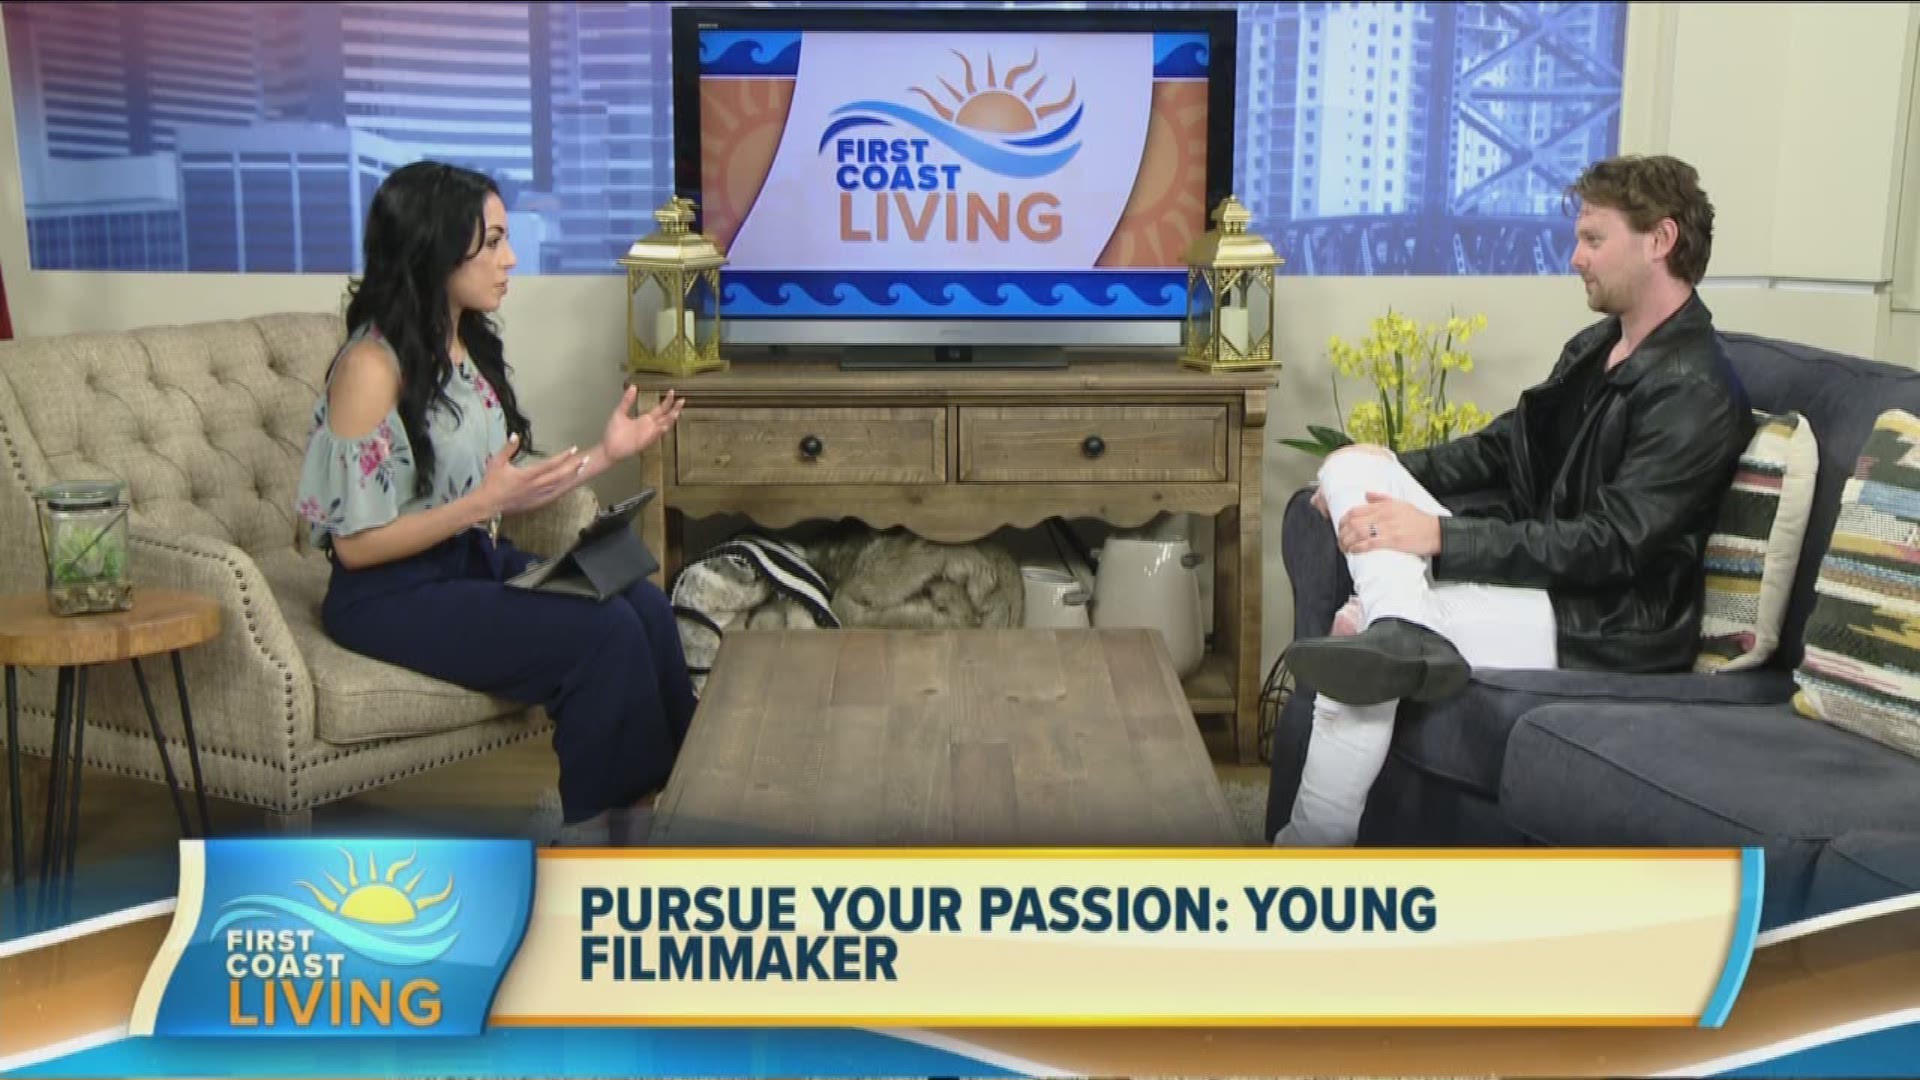 Hear the story of a young Jacksonville filmmaker that may inspire you to pursue your passion.